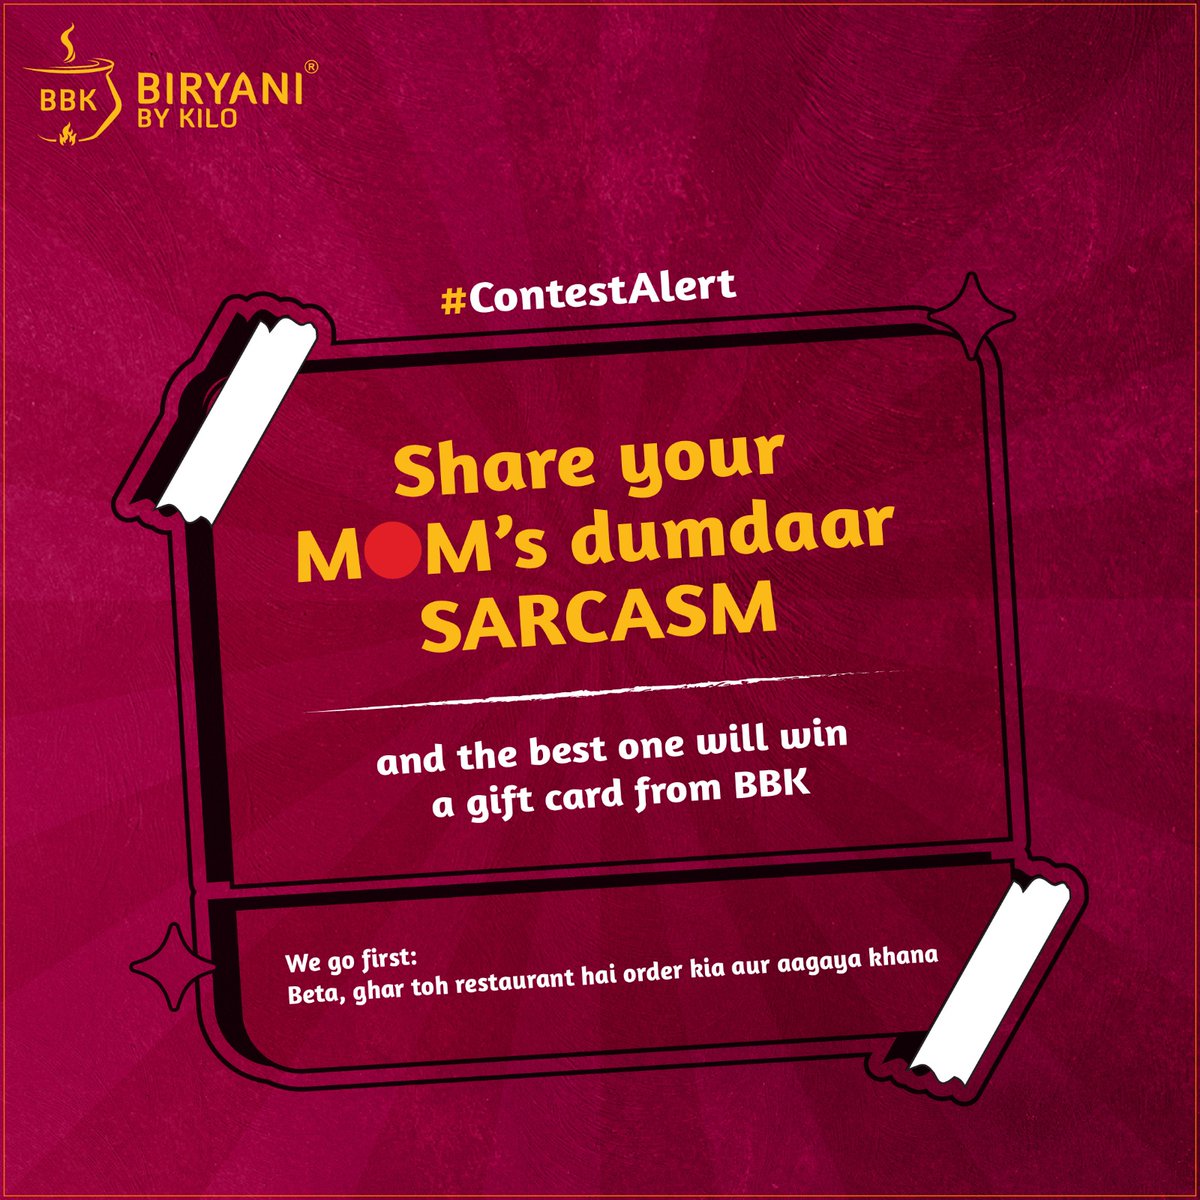 #ContestAlert Share with us in the comments those hilarious one-liners or epic sarcasm moments that only your mom can deliver and stand a chance to win a gift card. 😂 👩‍👧‍👦 #ContestAlert #BiryaniByKilo #MothersdayContest #BiryaniLovers #MomHumor